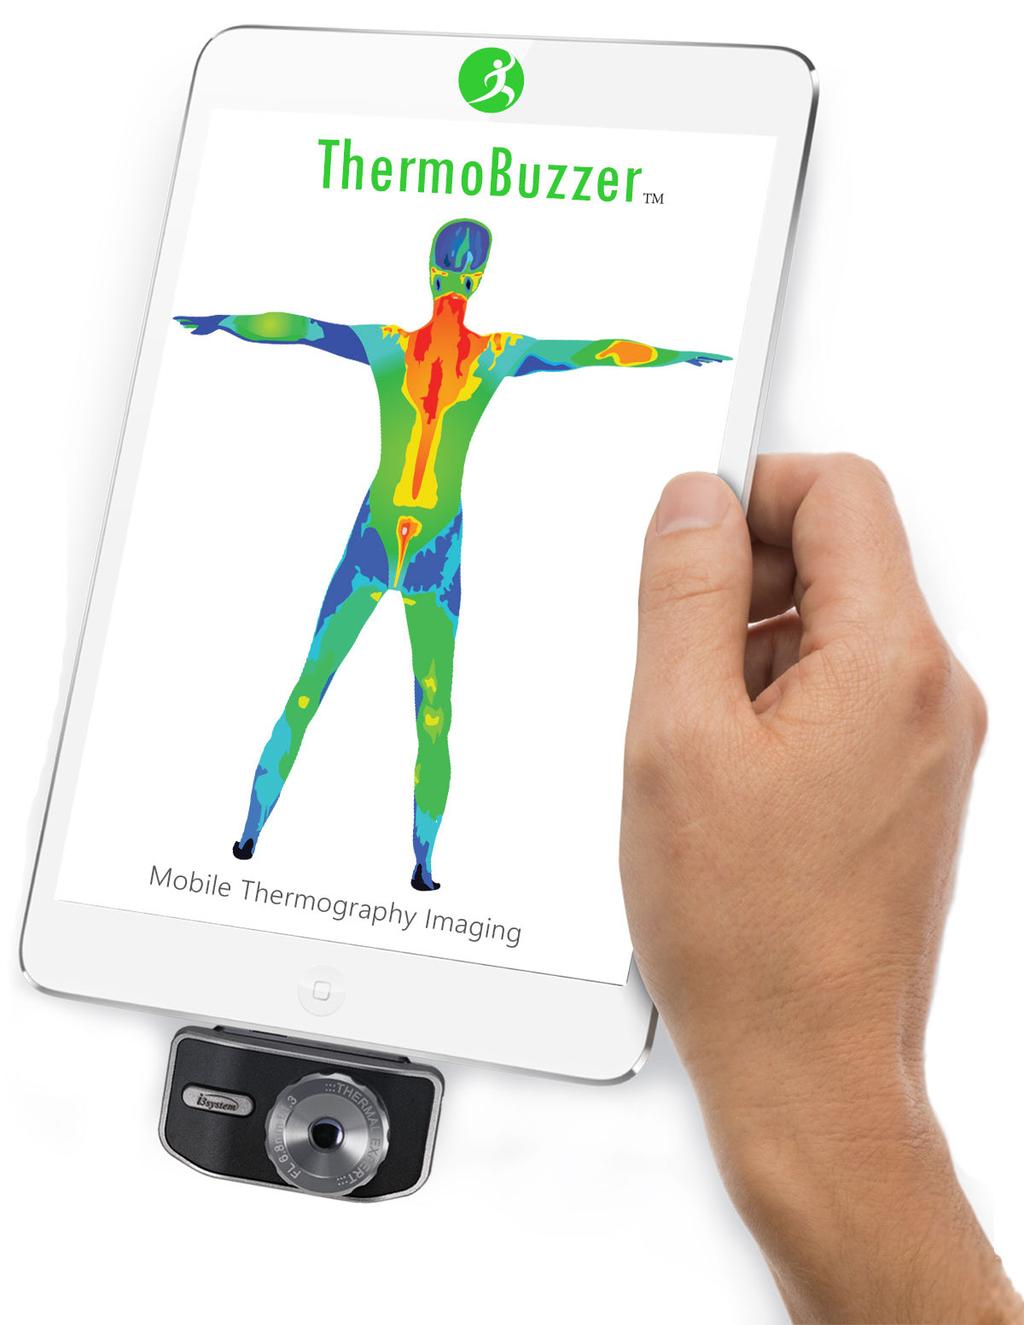 ThermoBuzzer Mobile Thermography Imaging System Cutting-Edge Prevention Mobile Thermography with Precision Holistic Root-Cause Analysis & Lifestyle Medicine Solutions.